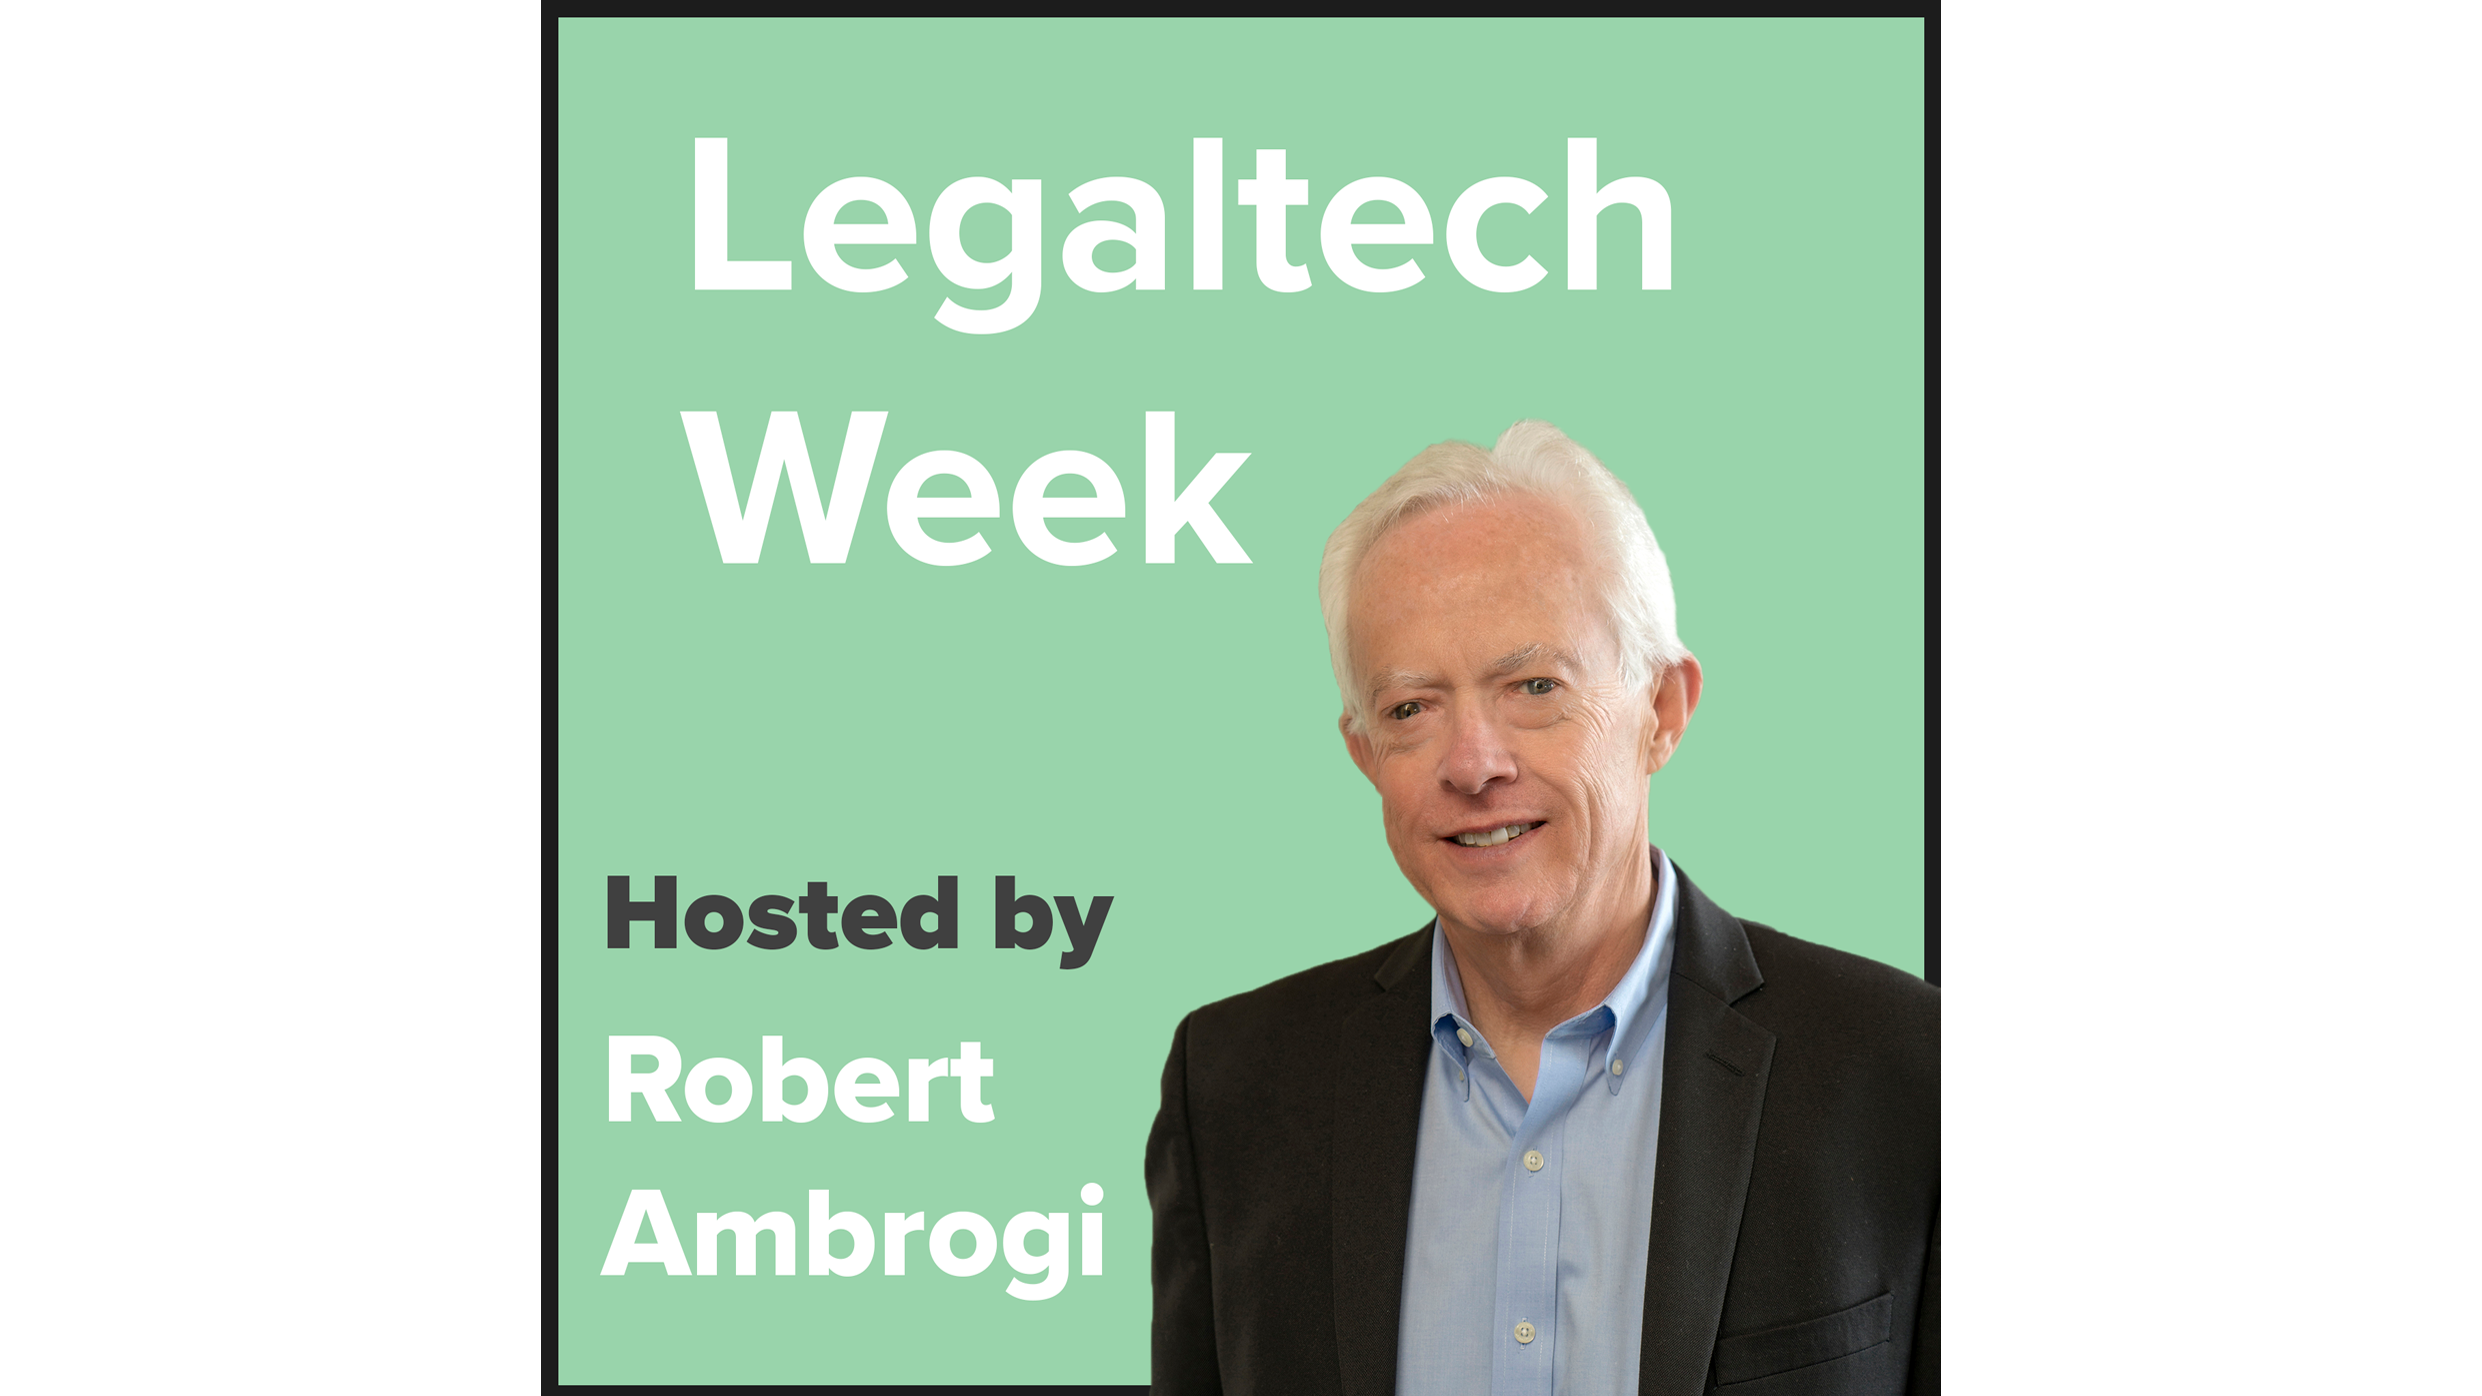 Legaltech Week 4.17.20: New Ethics Guidance on WFH and More from the Week’s News